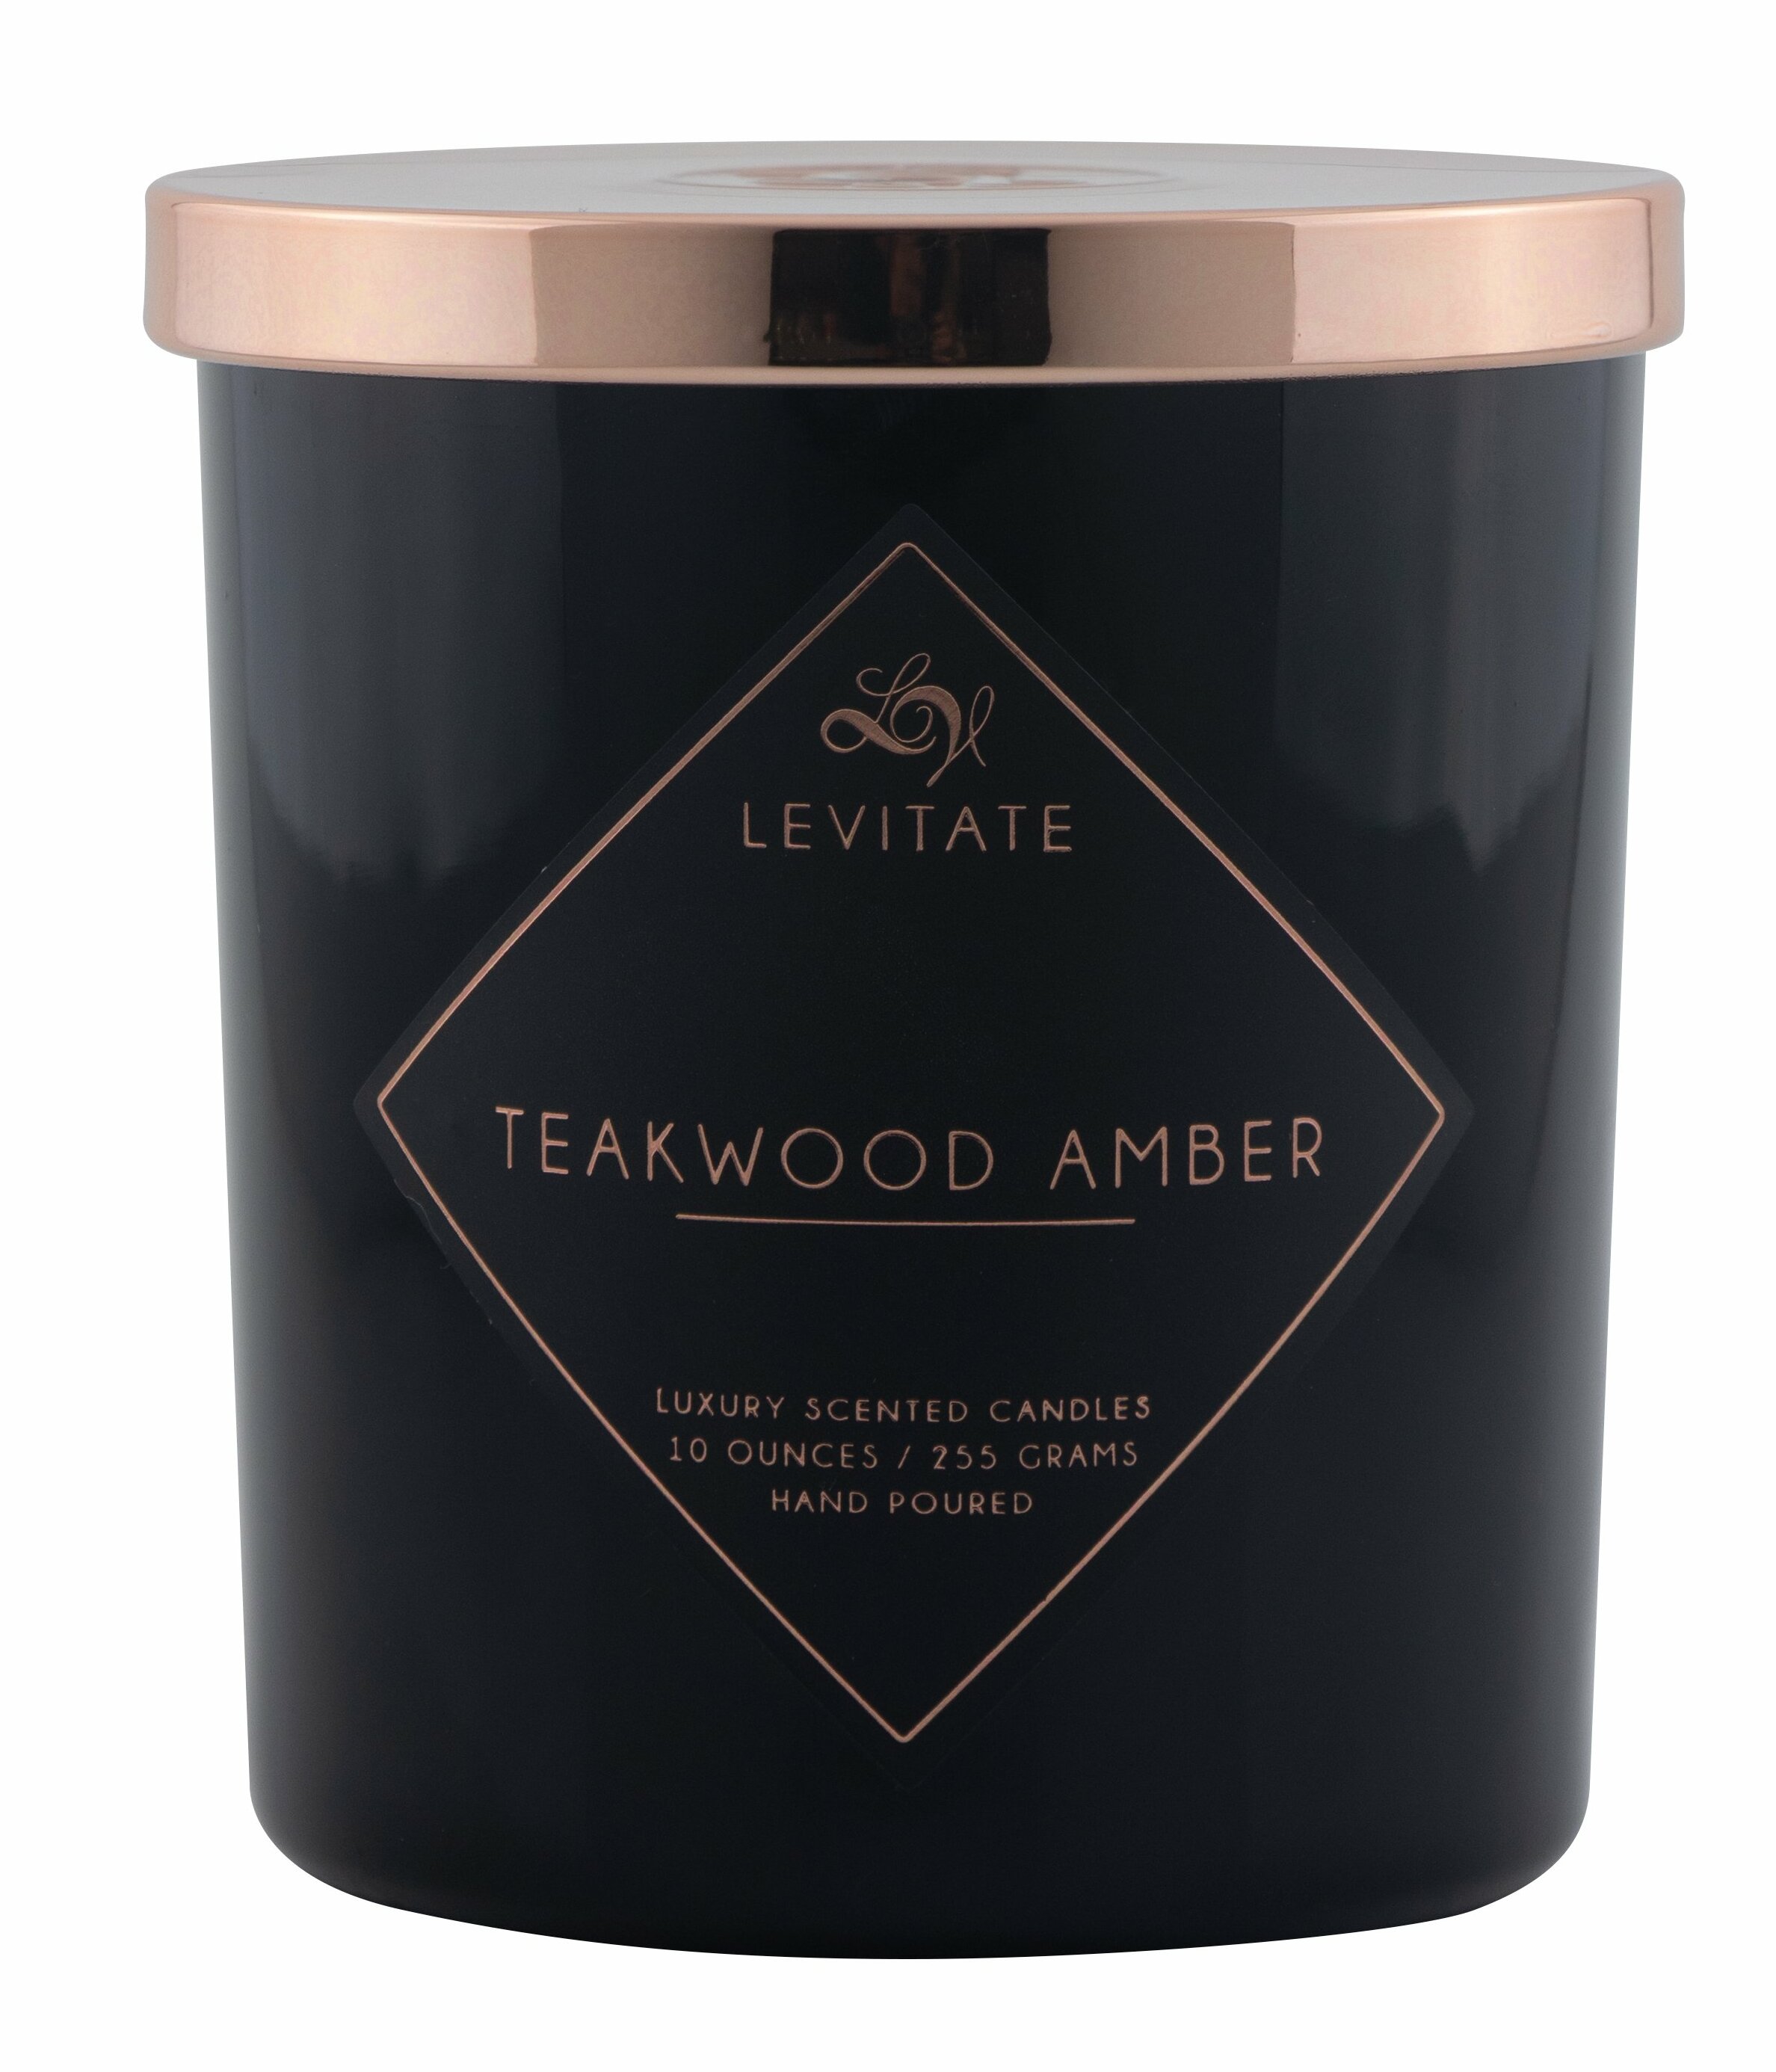 5-Ounce Redwood & Amber Paddywax Woods Collection Scented Soy Wax Candle in Mango Wood 